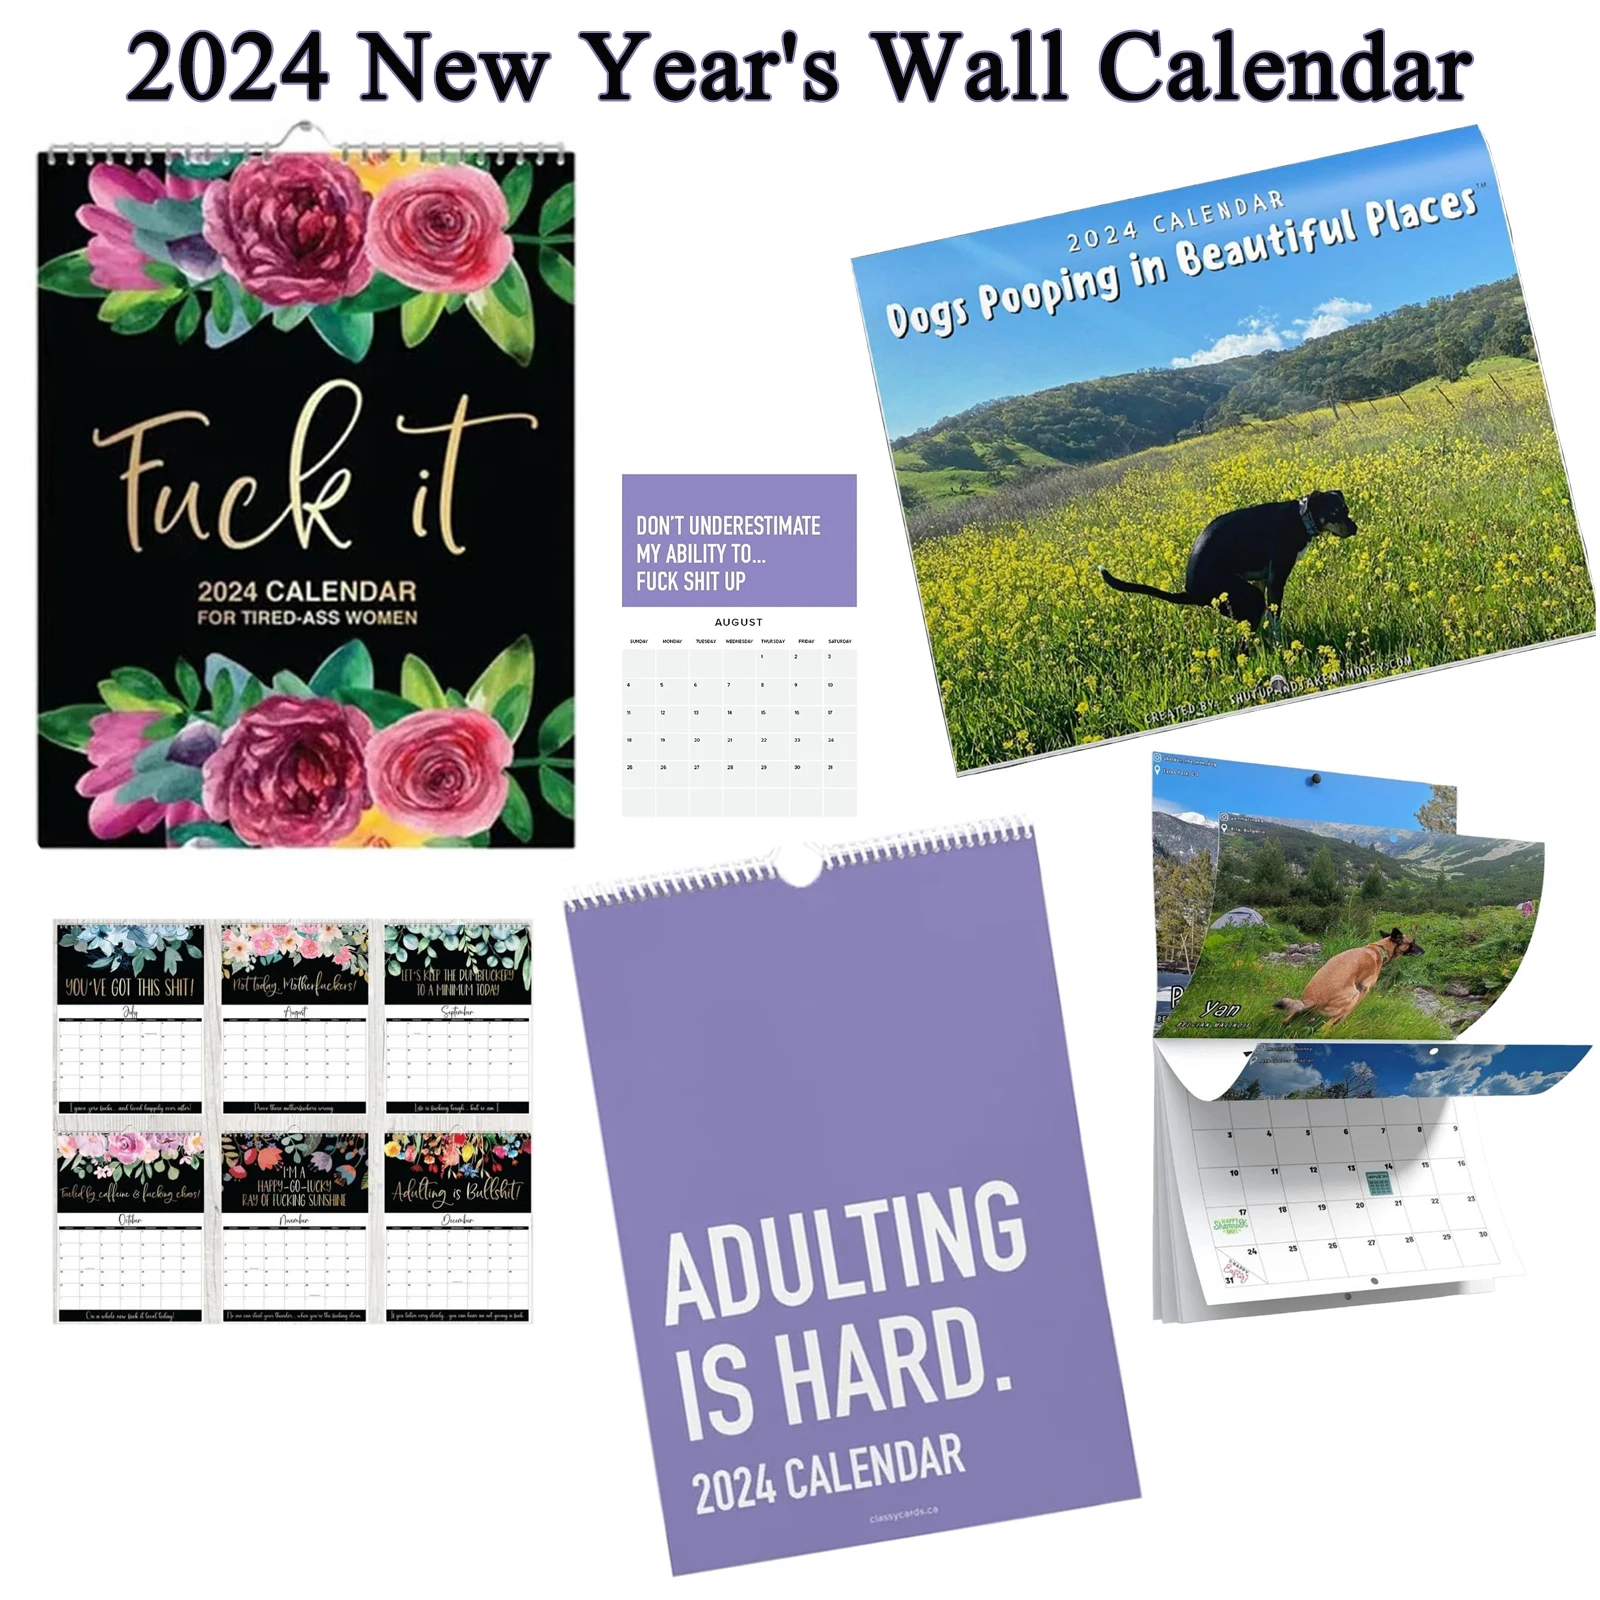 Monthly Wall Calendar 2024 Funny Dog Pooping Calendar Gift Flowers Hanging Calendar Time Planning New Year Home Indoor Decor 2024 business office desk cartoon calendar ornaments table tabletop small time schedule home decor desktop supplies decorative